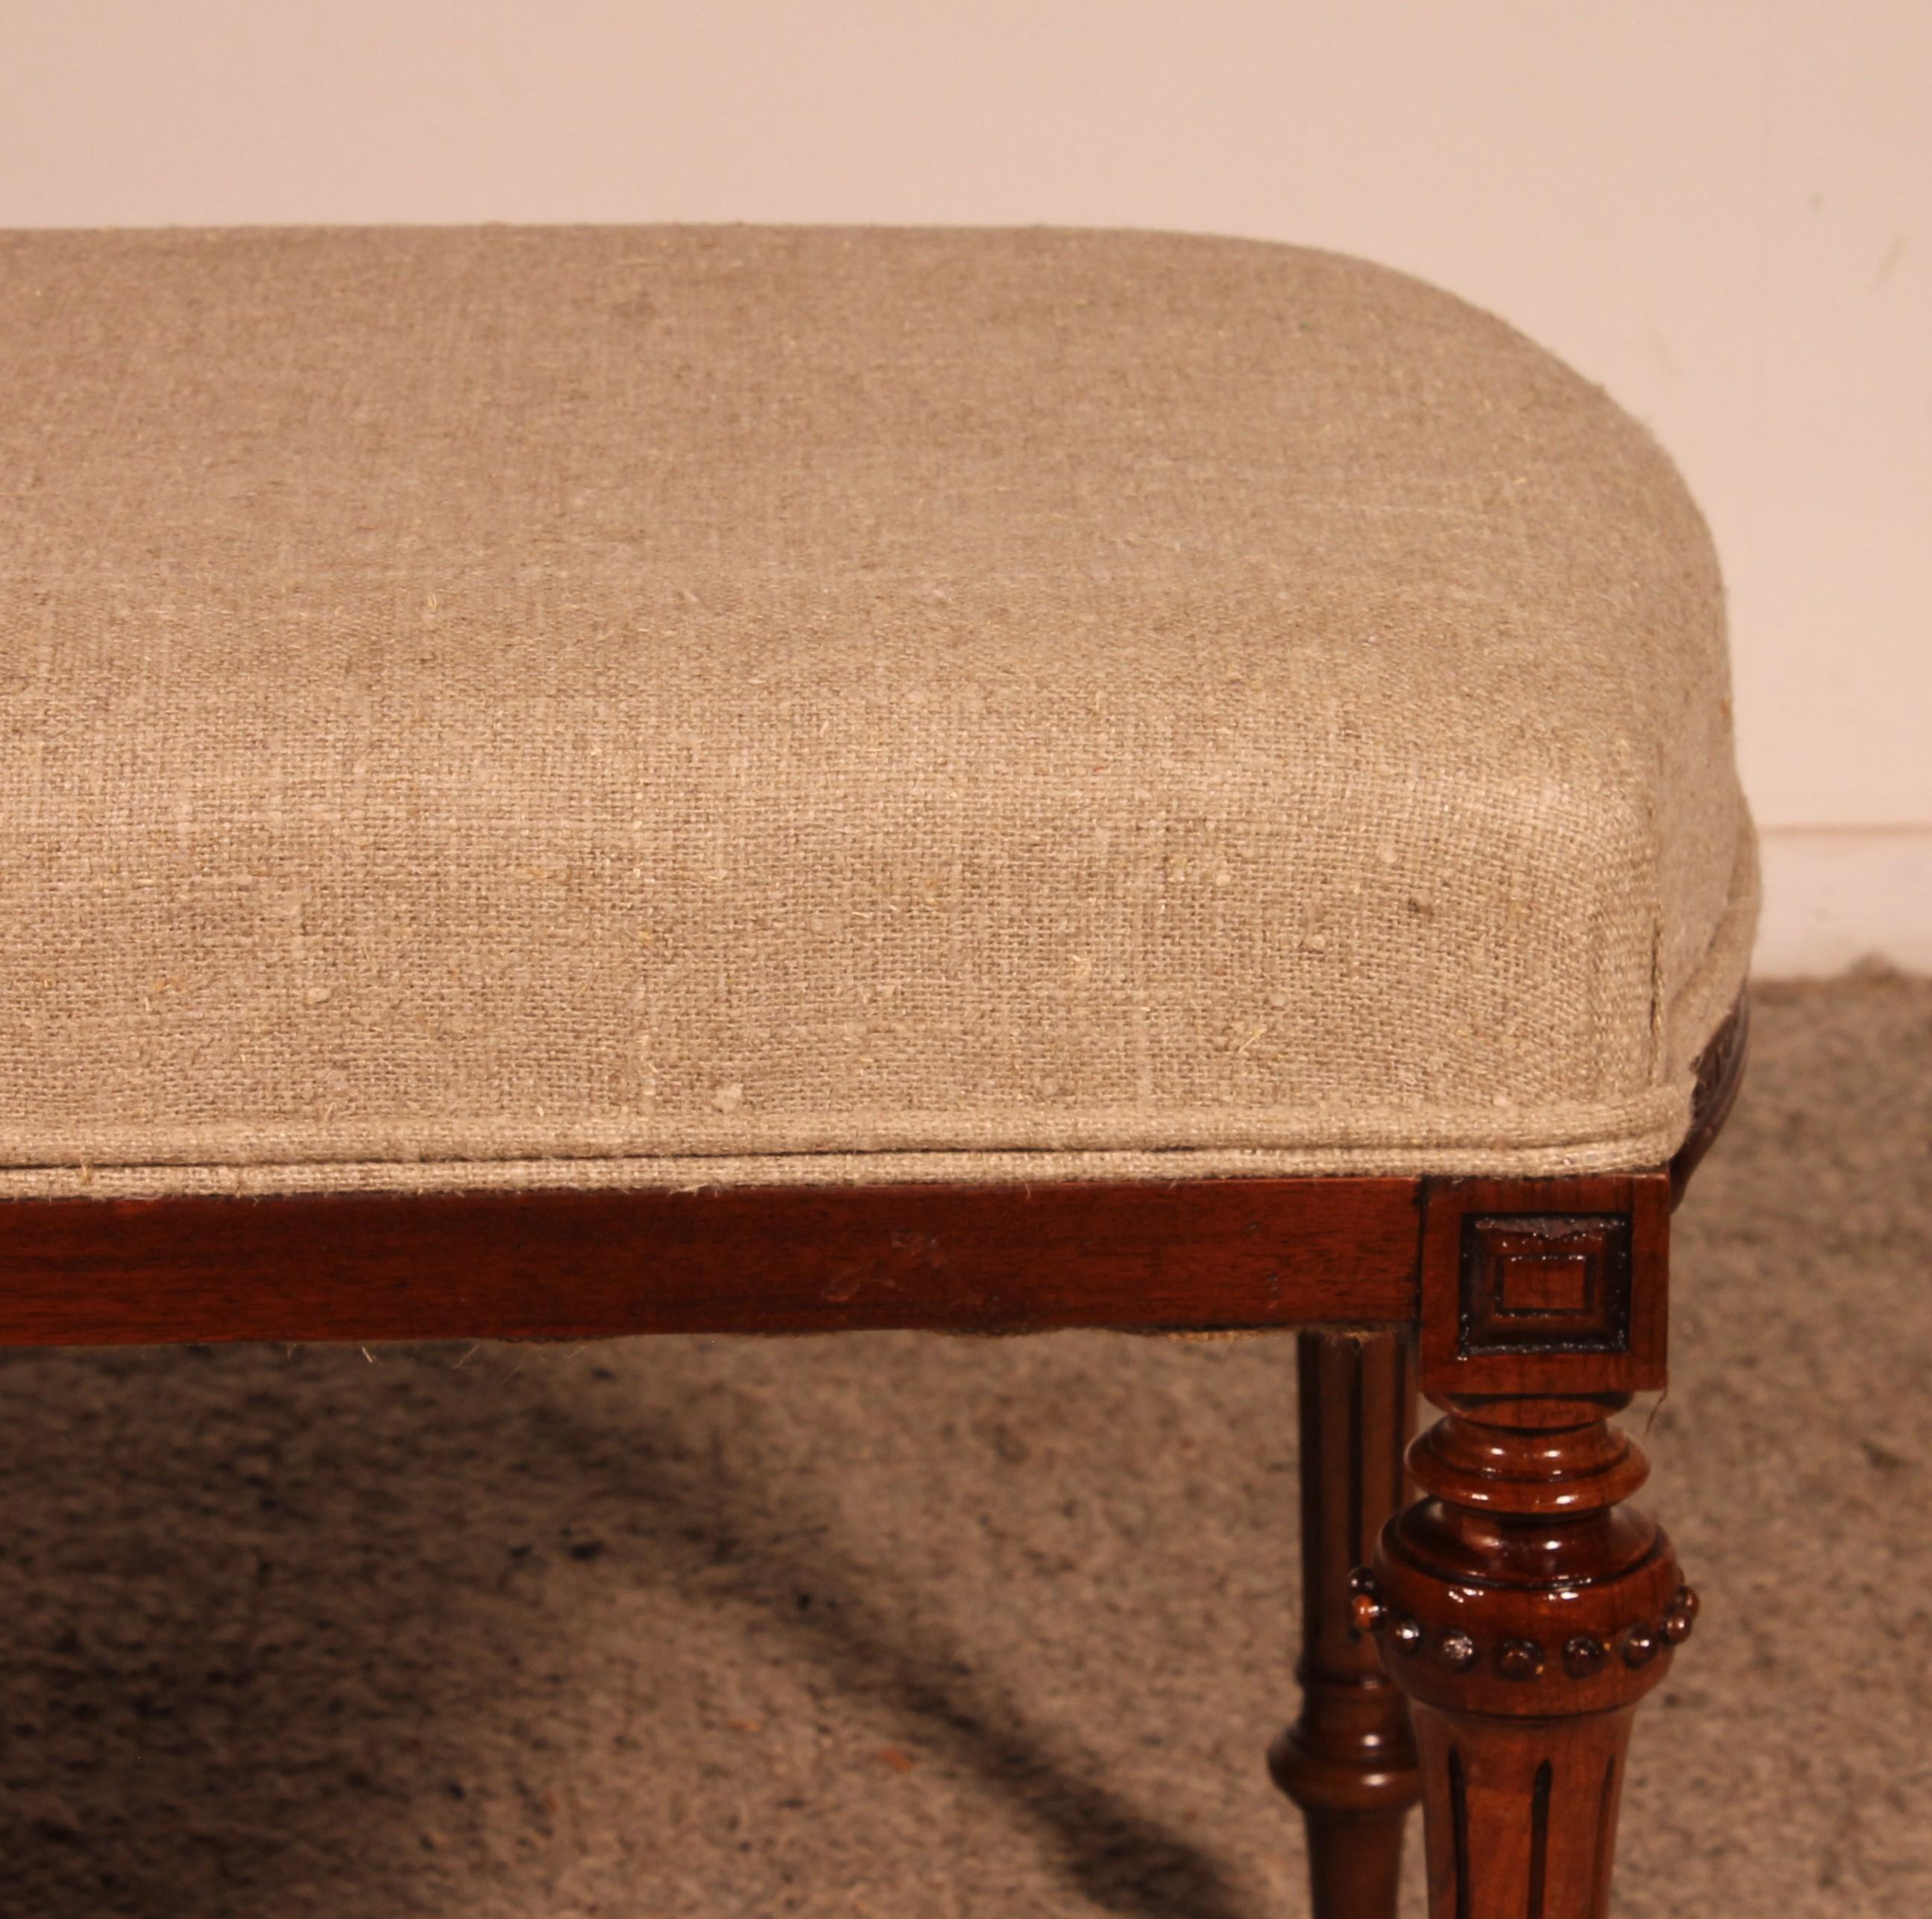 British Mahogany Bench From The 19th Century Covered With A Linen Fabric